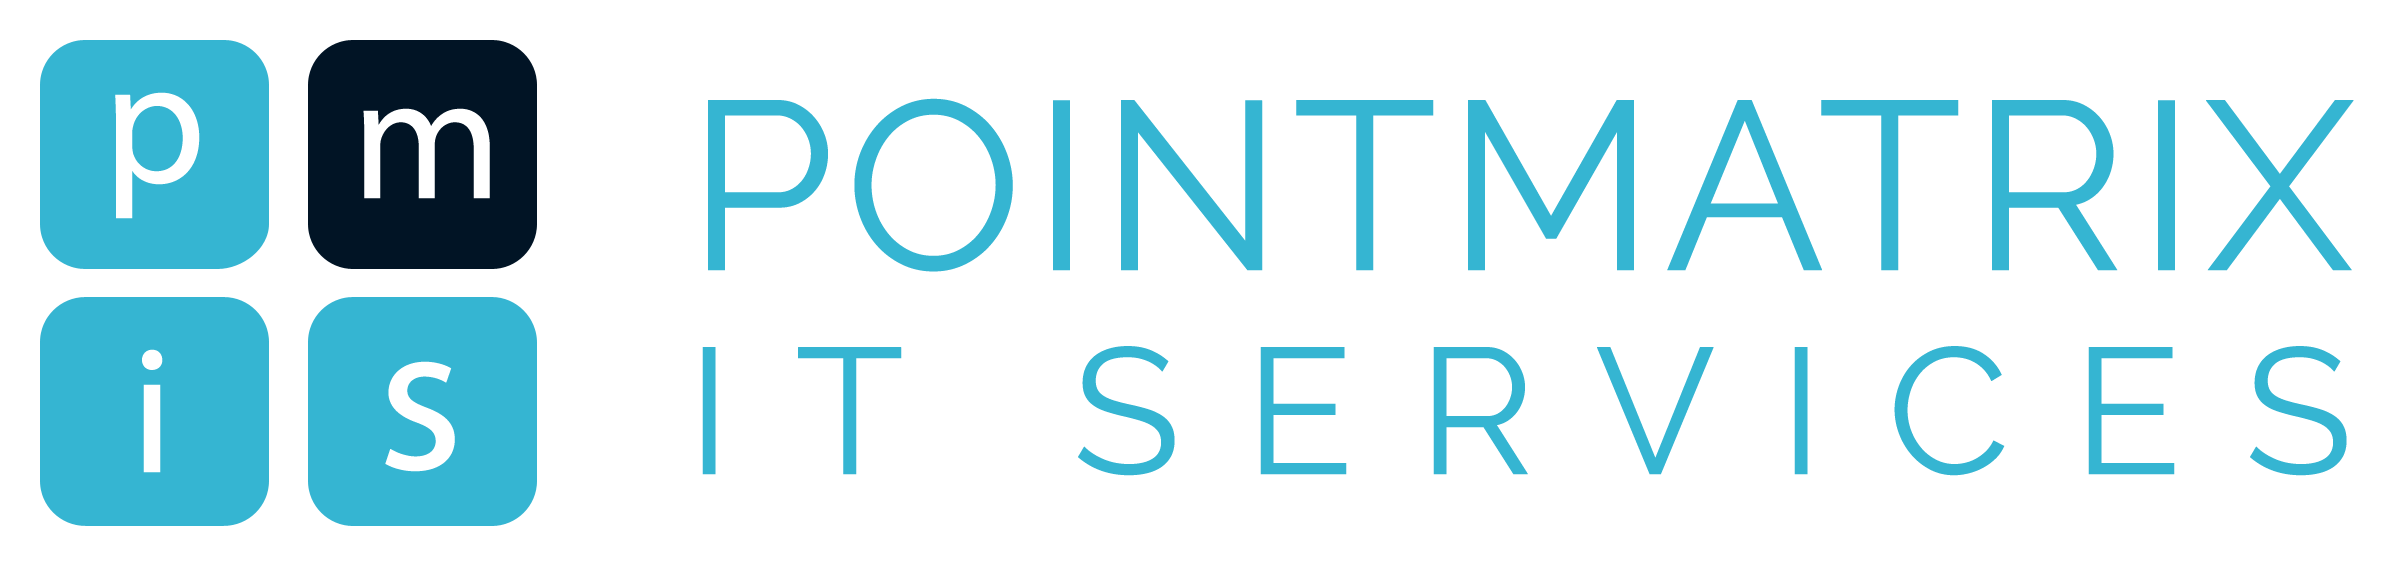 PointMatrix IT Services profile on Qualified.One